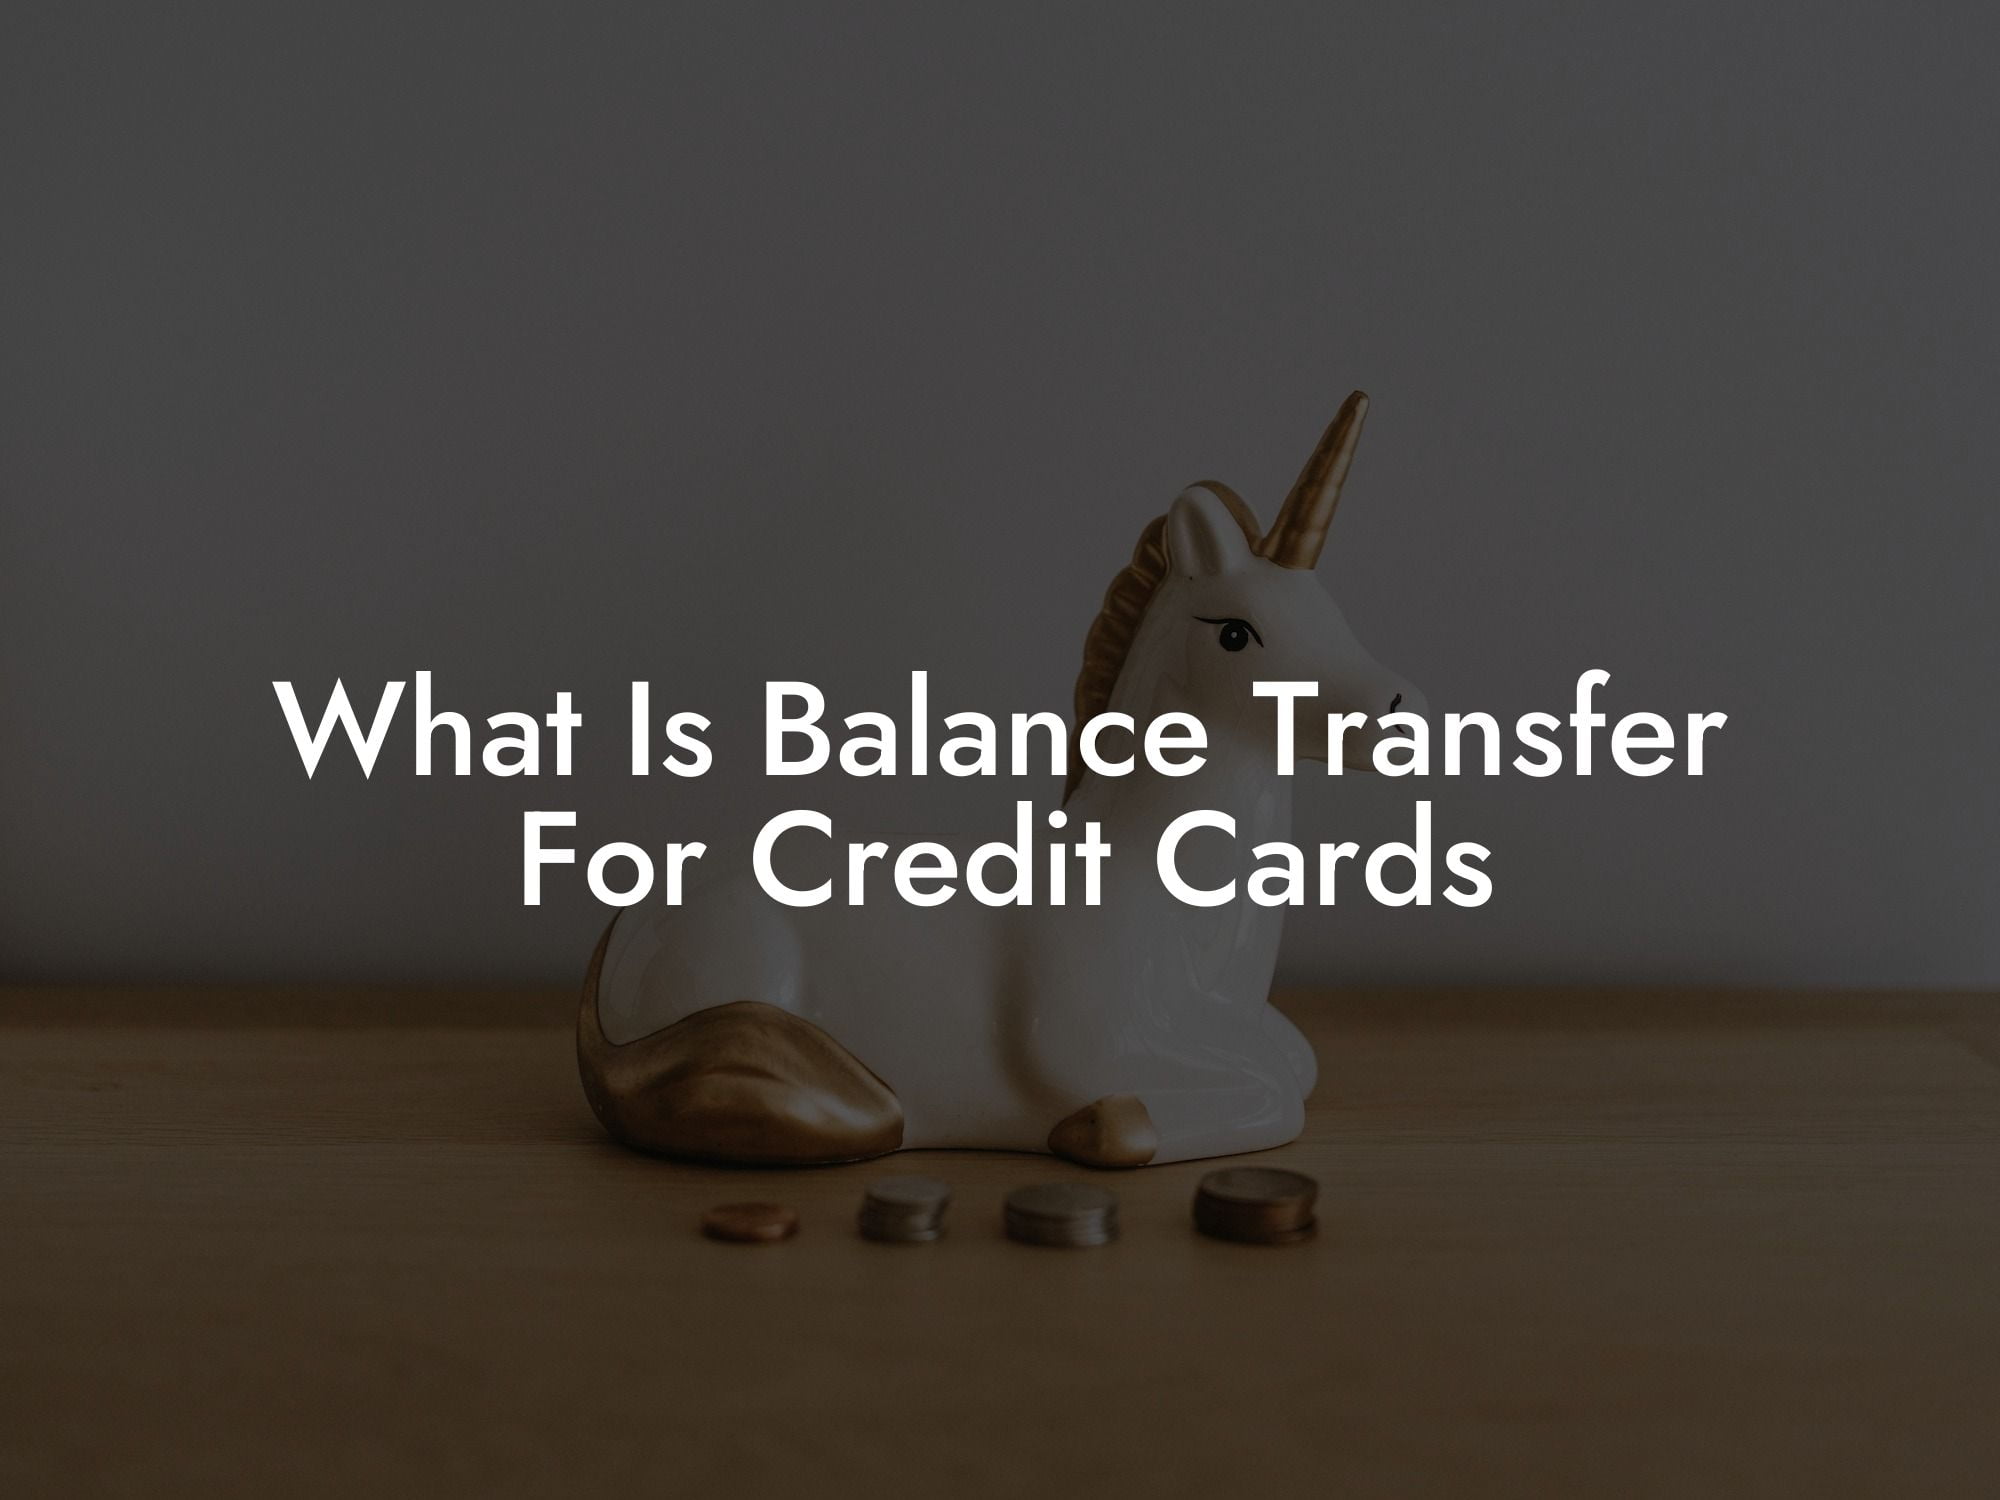 What Is Balance Transfer For Credit Cards